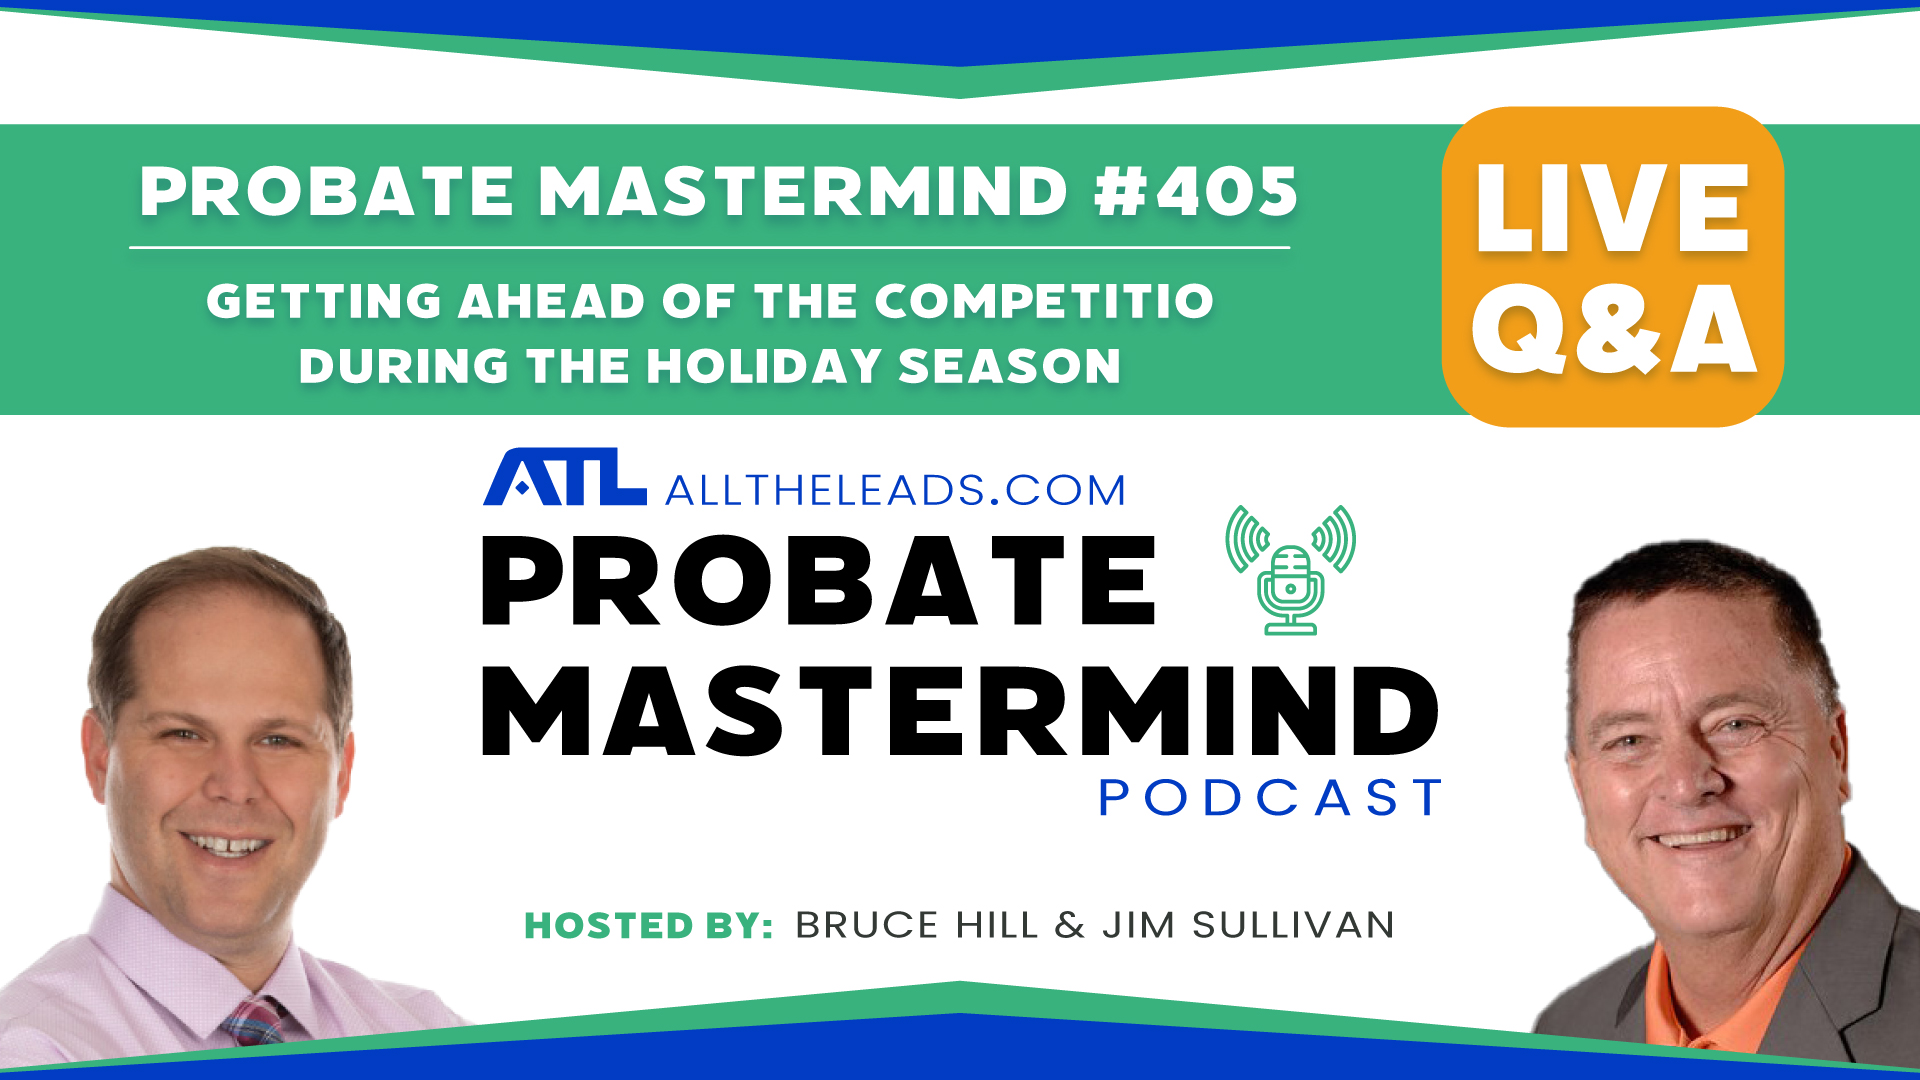 Getting Ahead of the Competition During the Holiday Season | Probate Mastermind Episode #405